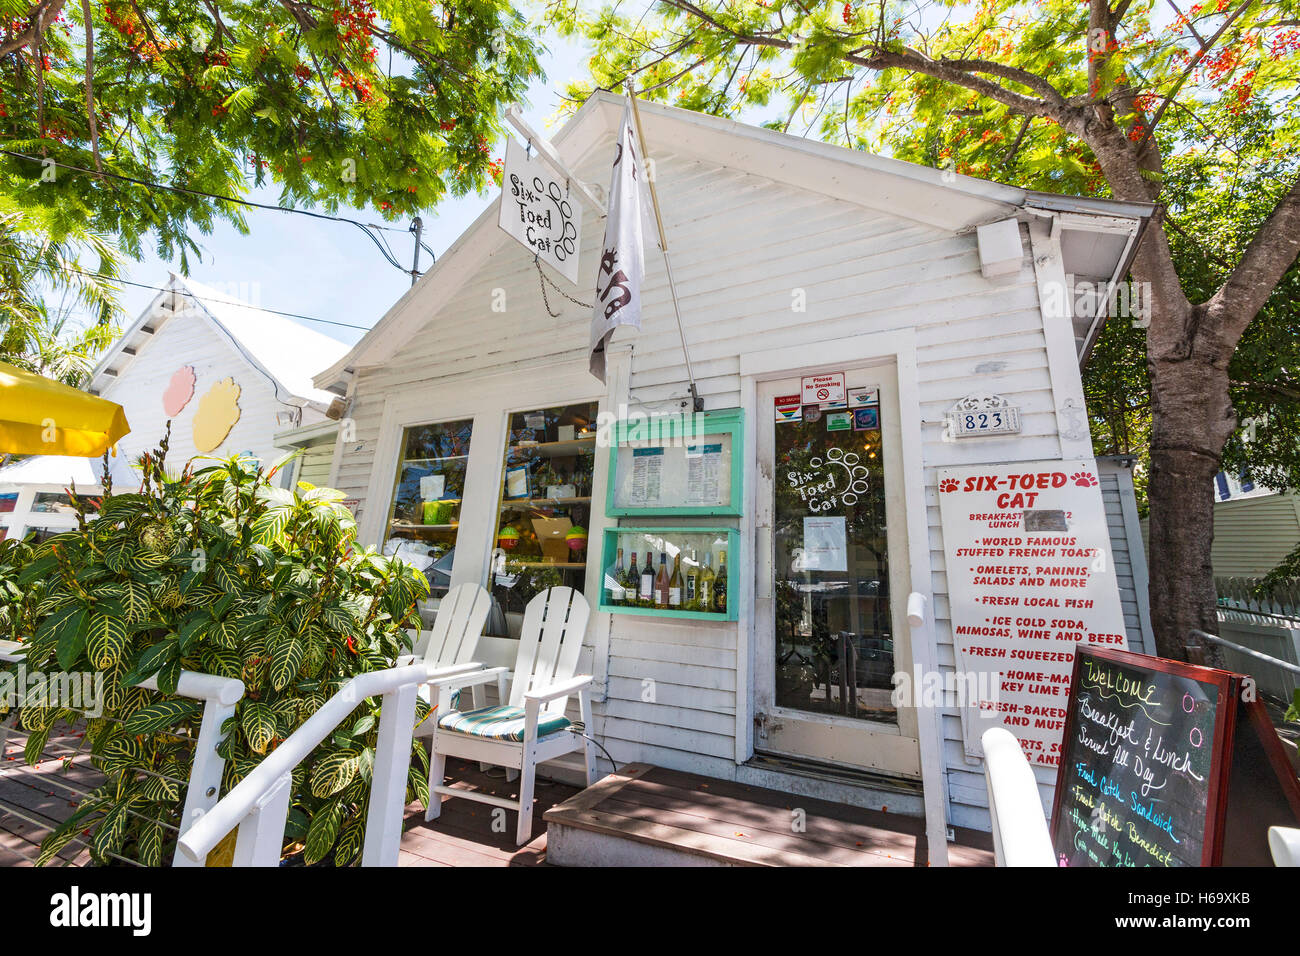 One of many shops in Key West's historic district focusing on the area's famous Hemingway six toed cats. Stock Photo